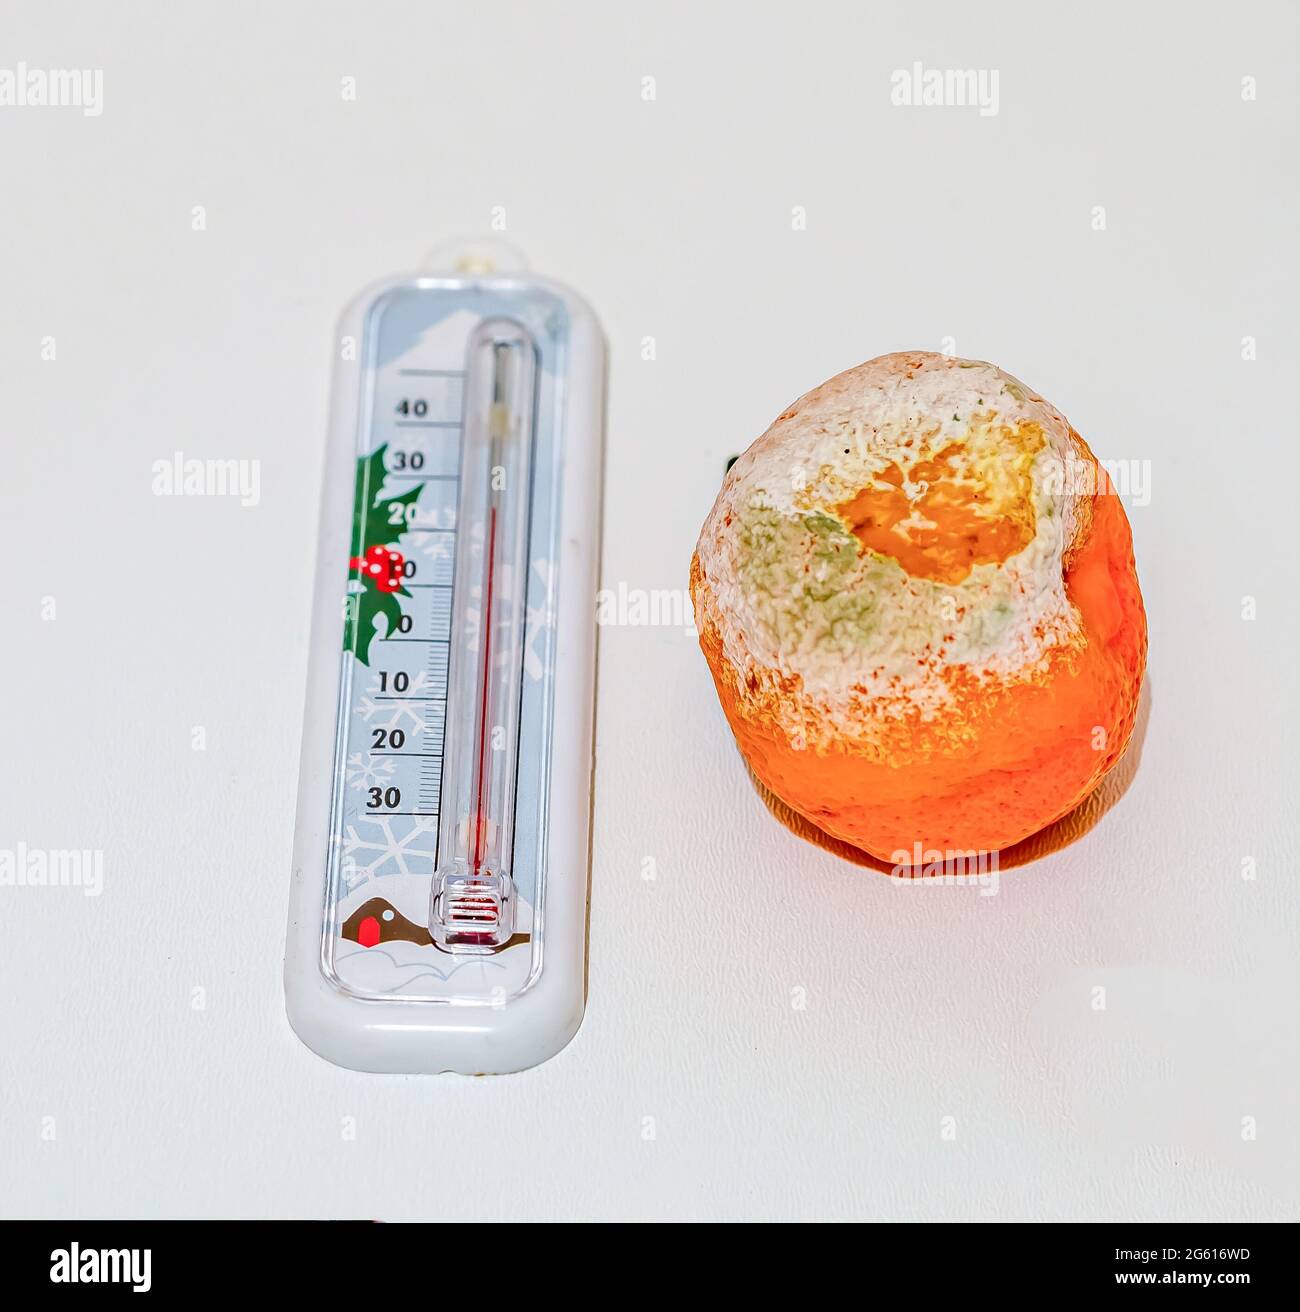 Old and bad orange next to a thermometer, on a white surface Stock Photo